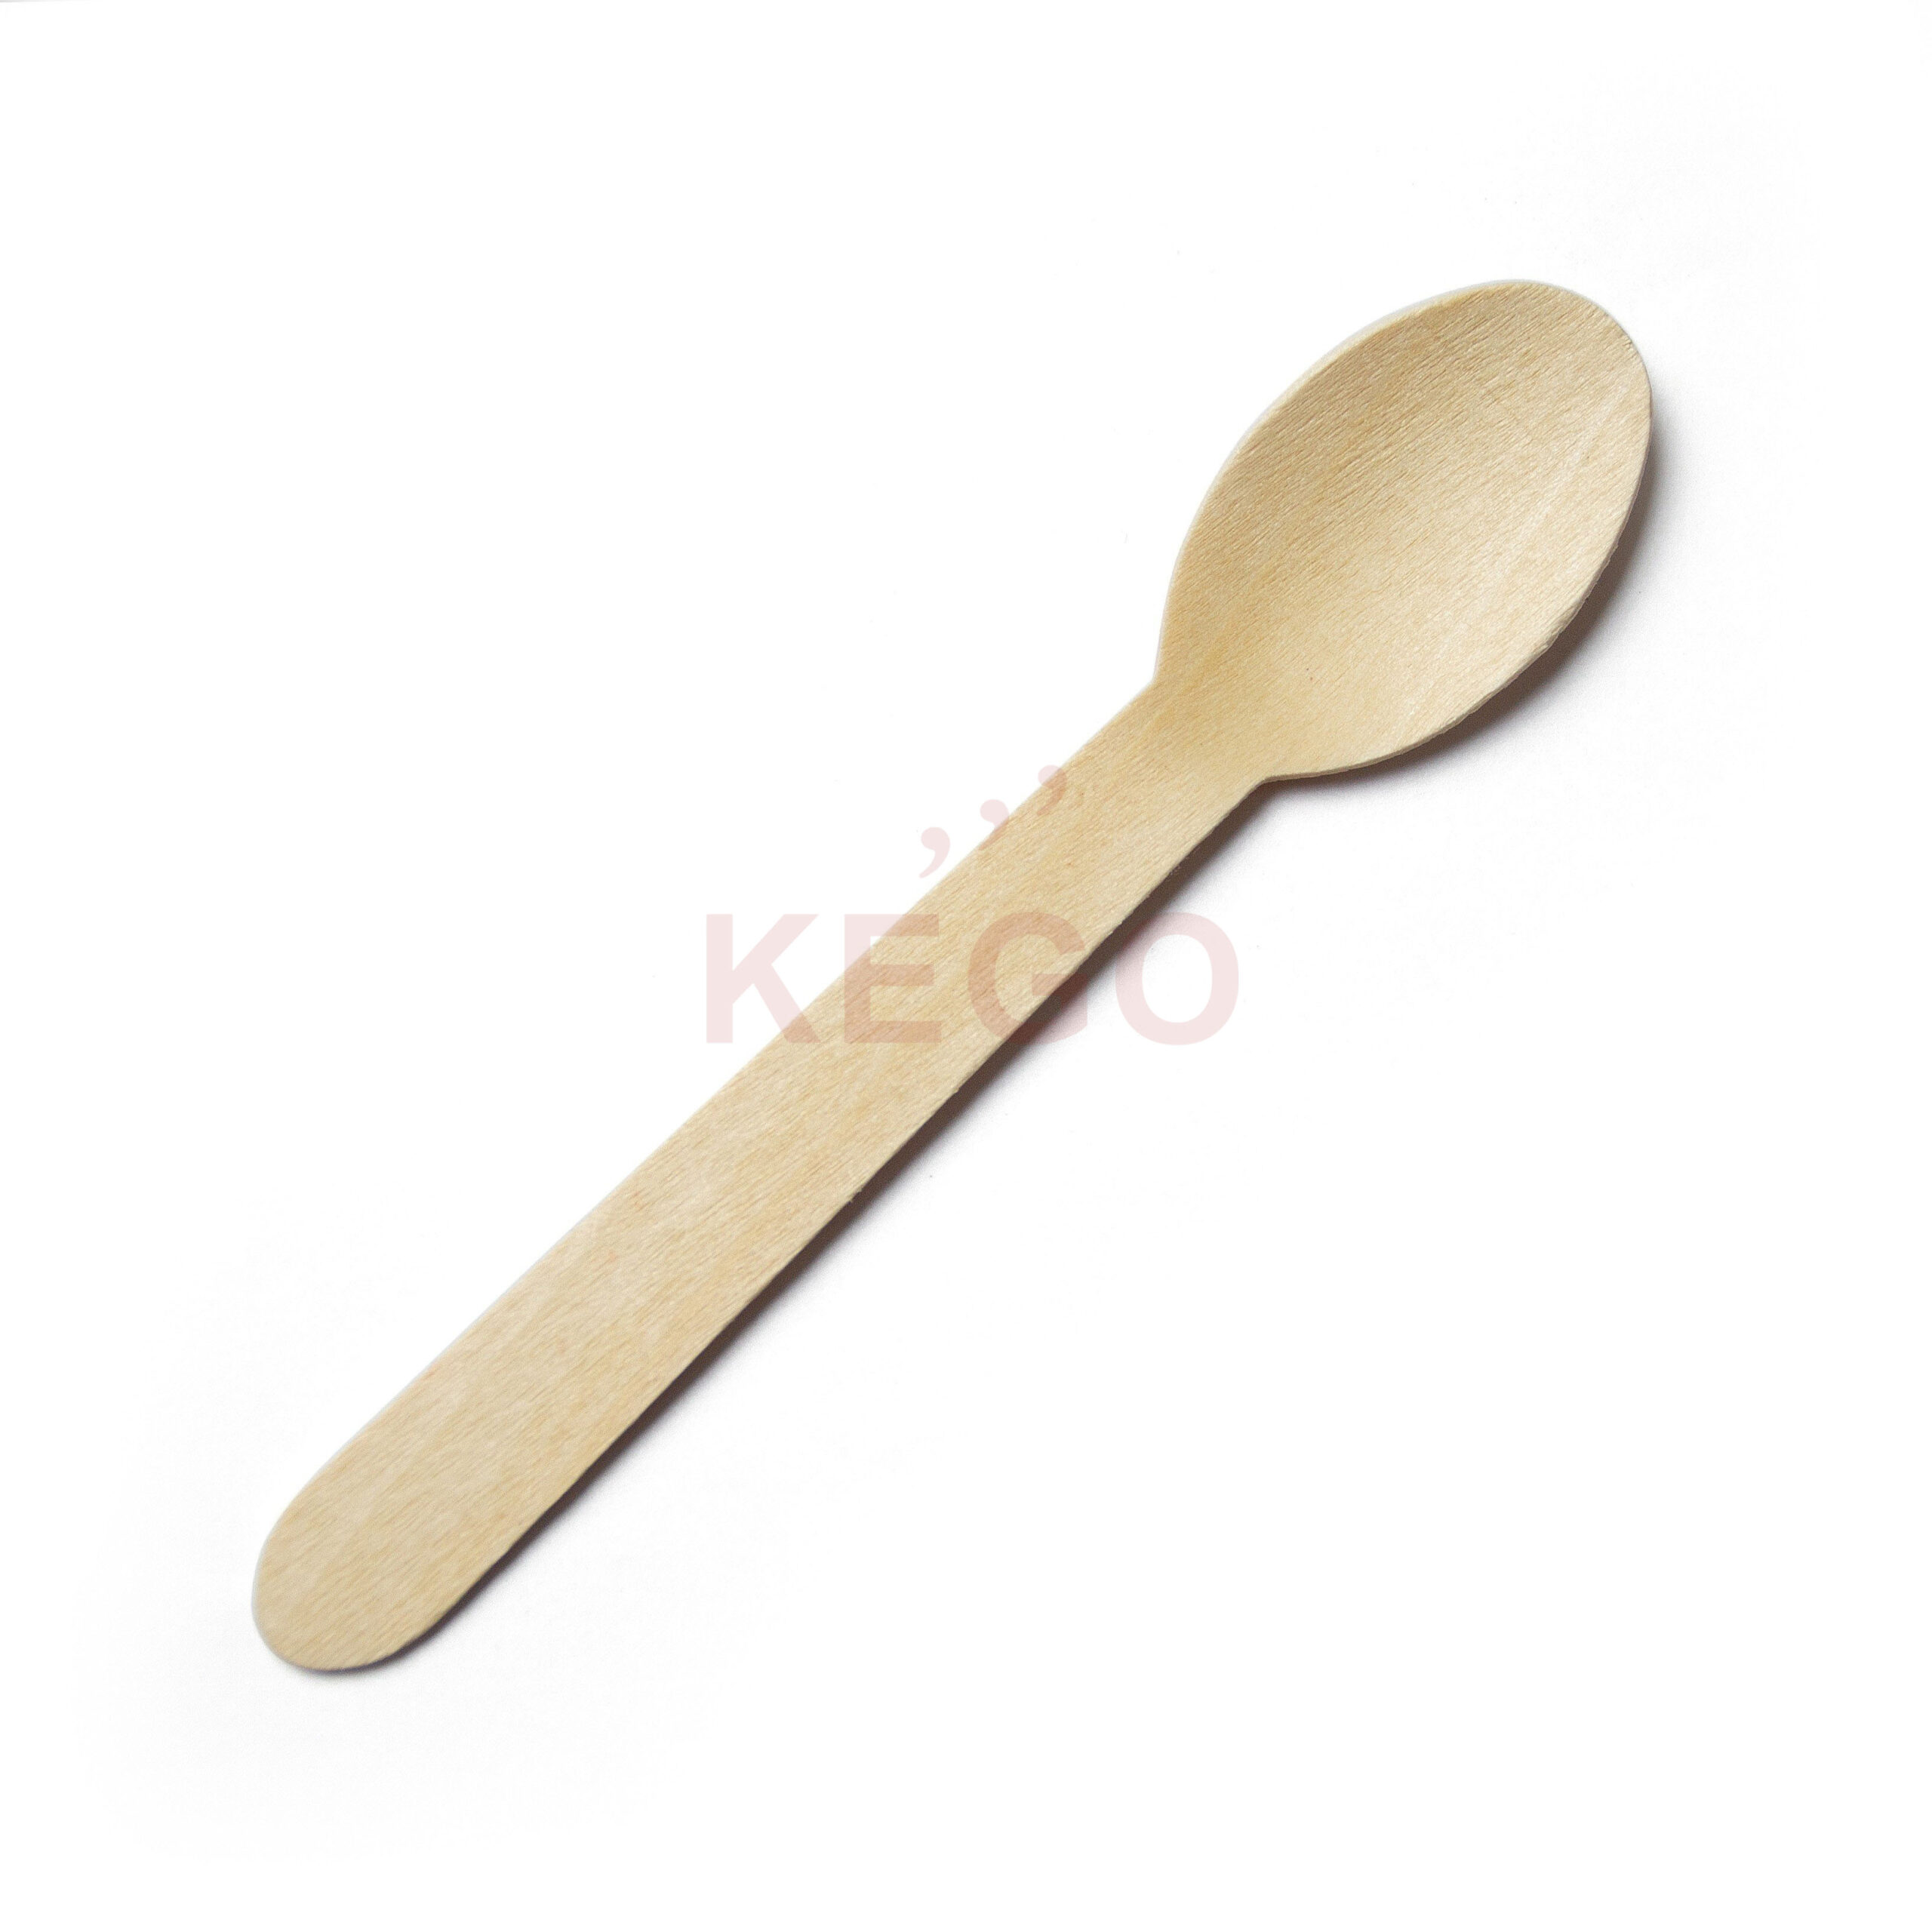 https://kego.vn/wp-content/uploads/2016/10/Disposable-Wooden-Spoon-160-3-scaled.jpg